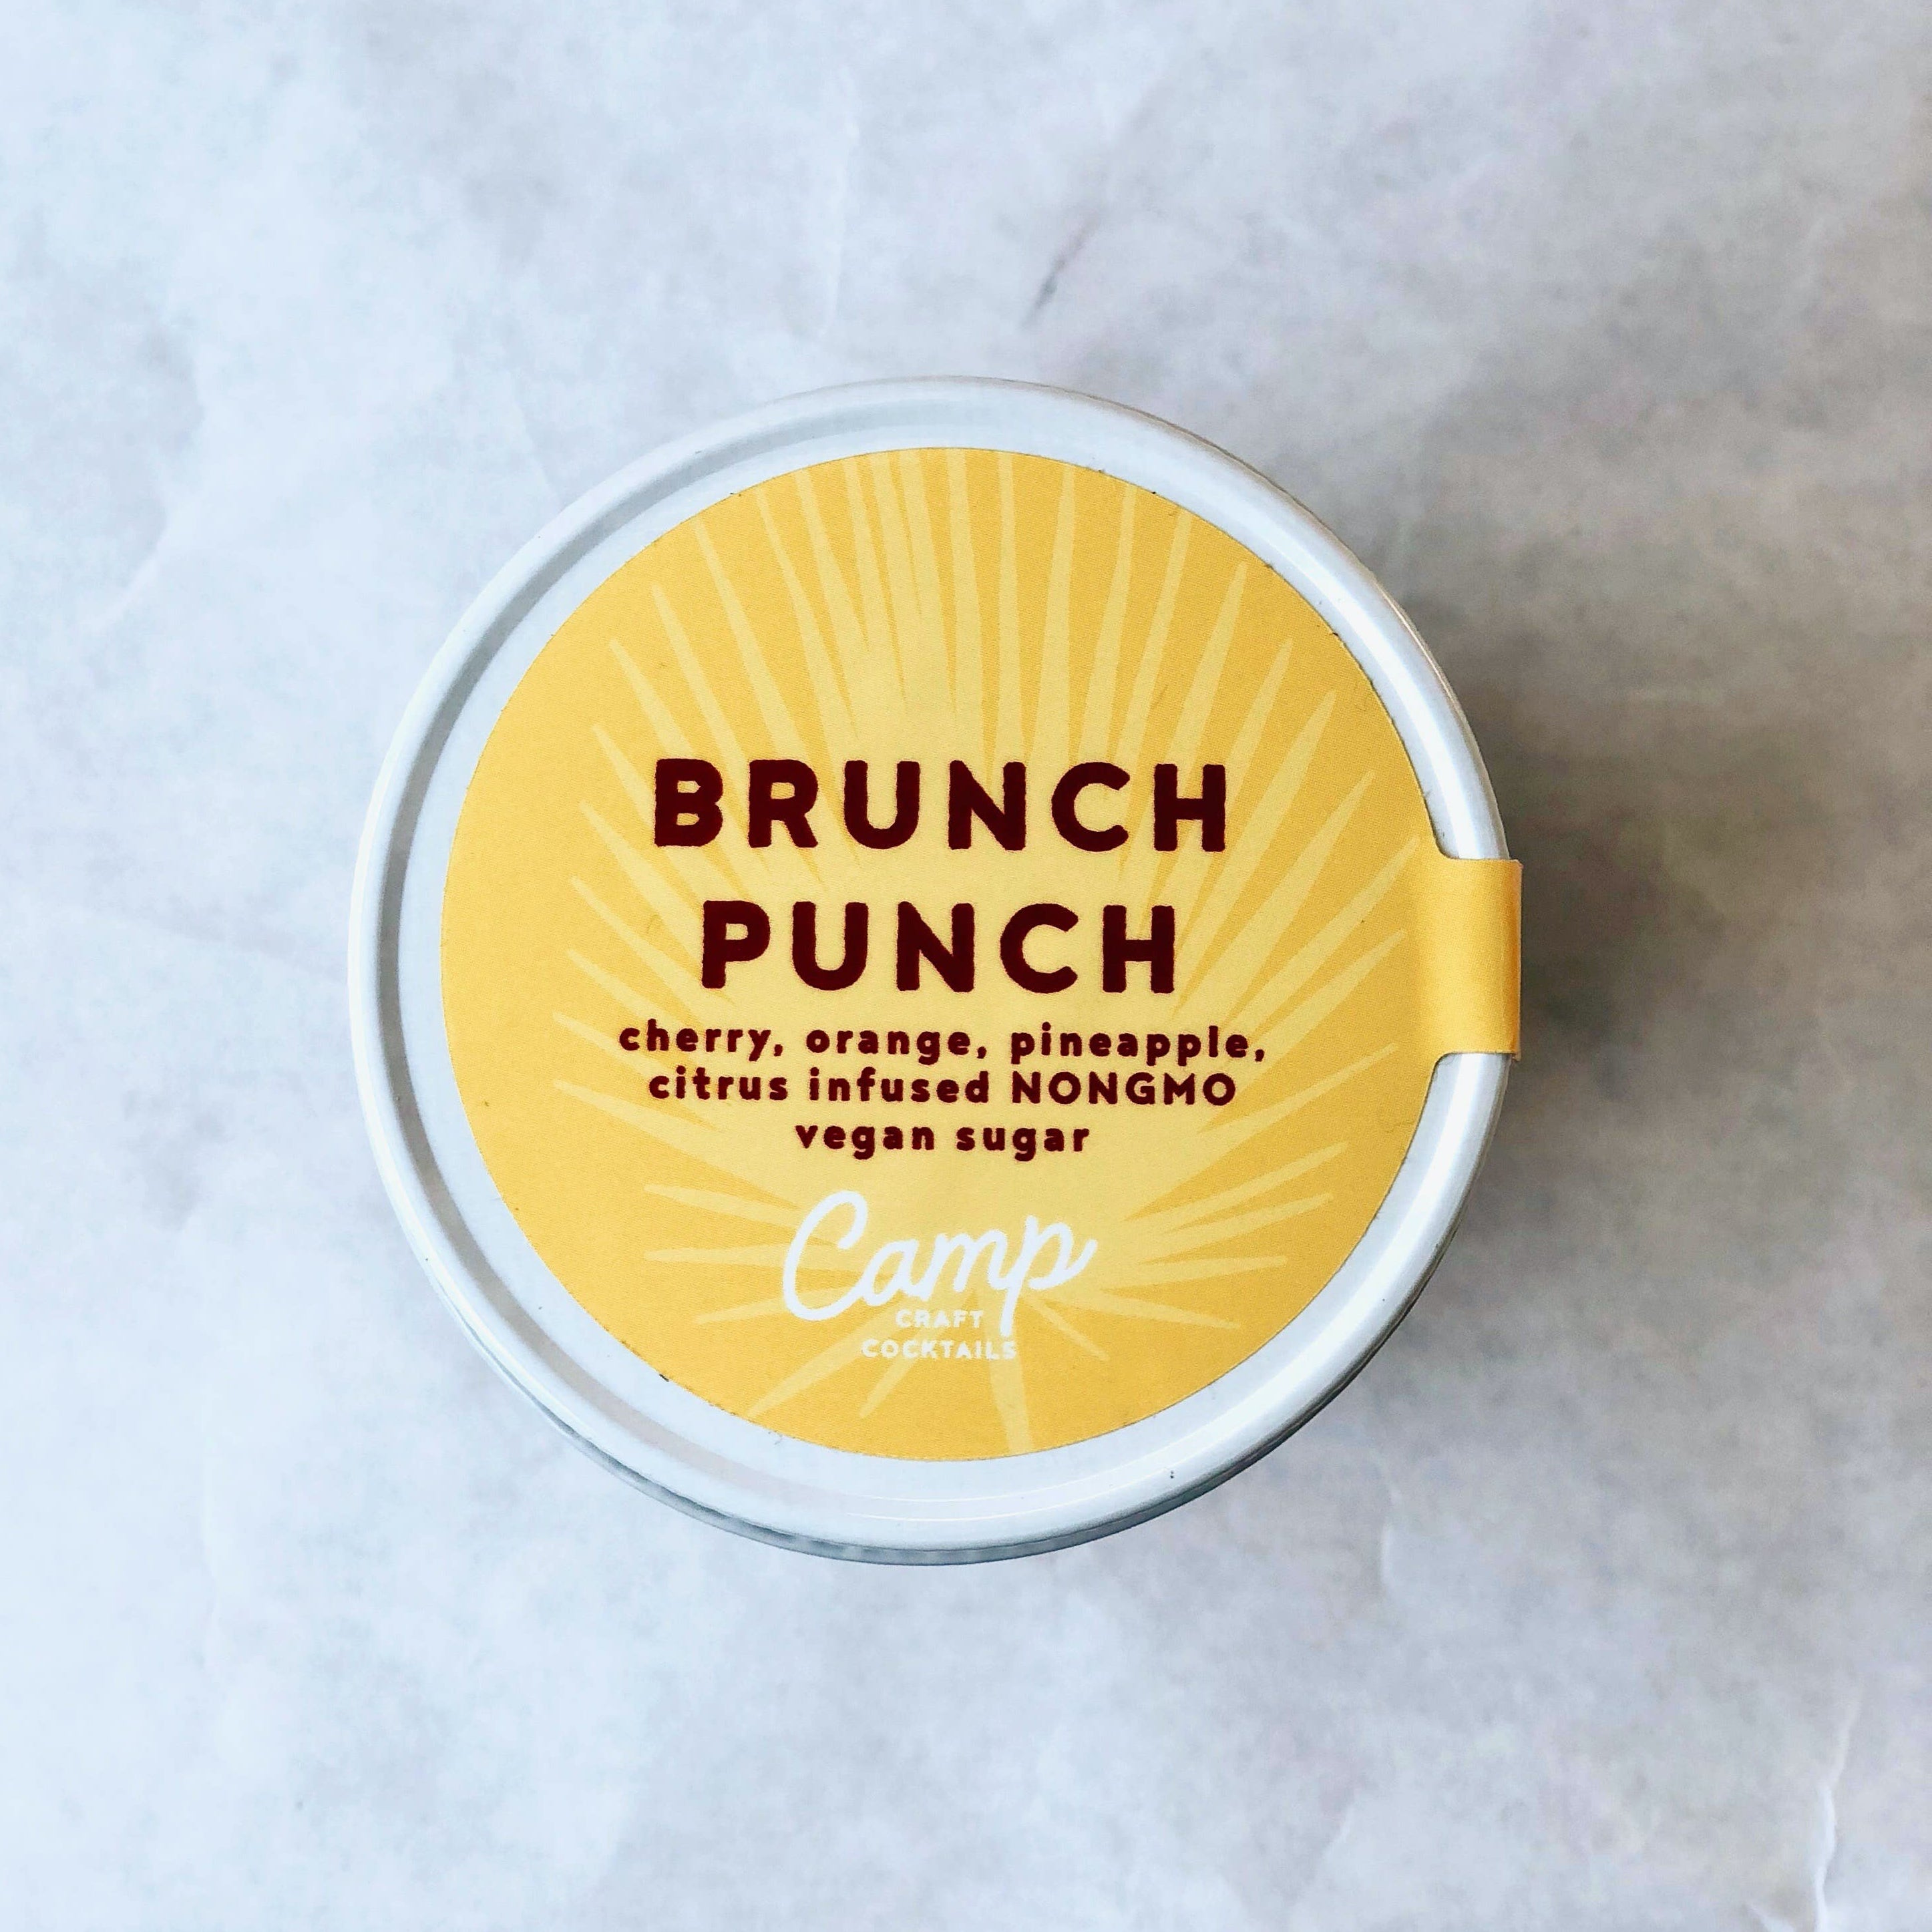 Brunch Punch Cocktail Infusion Kit